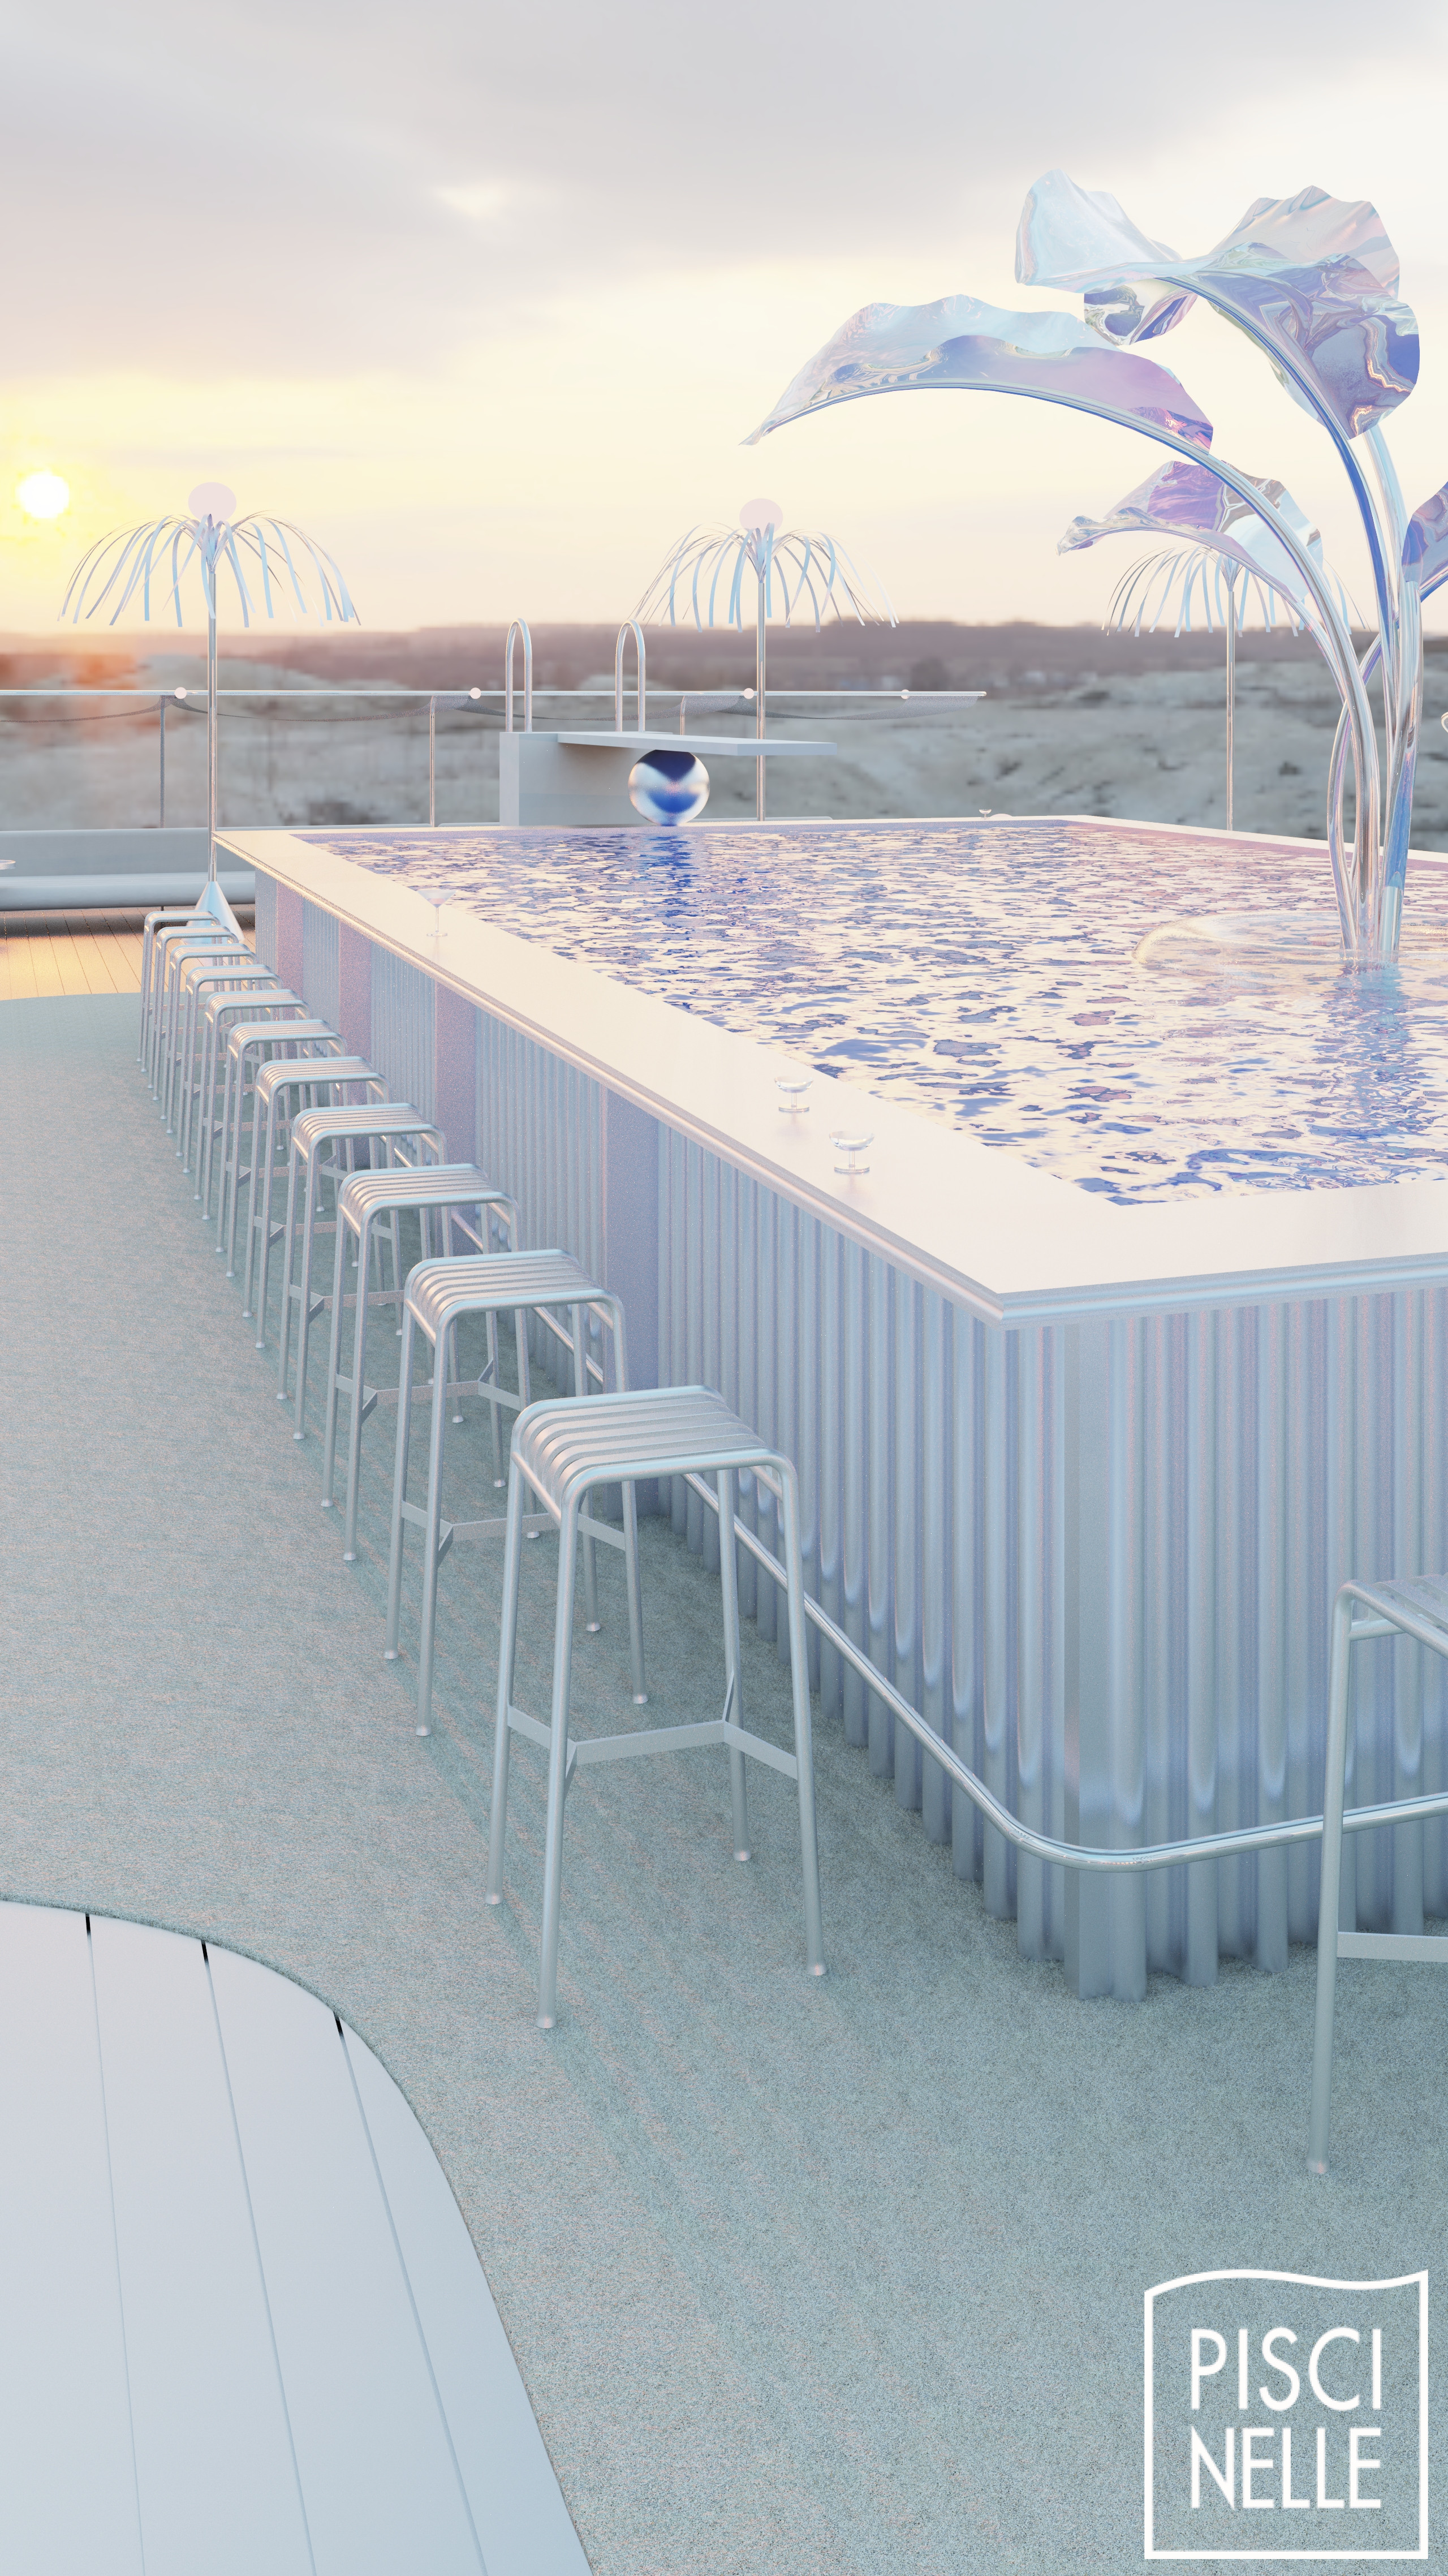 The space is focused on the pool and organised so that people circulate around it. It symbolises the source and renewal of social contact, particularly through its function as a bar, where we can imagine animated chatter over cocktails tinted pink by the setting sun.